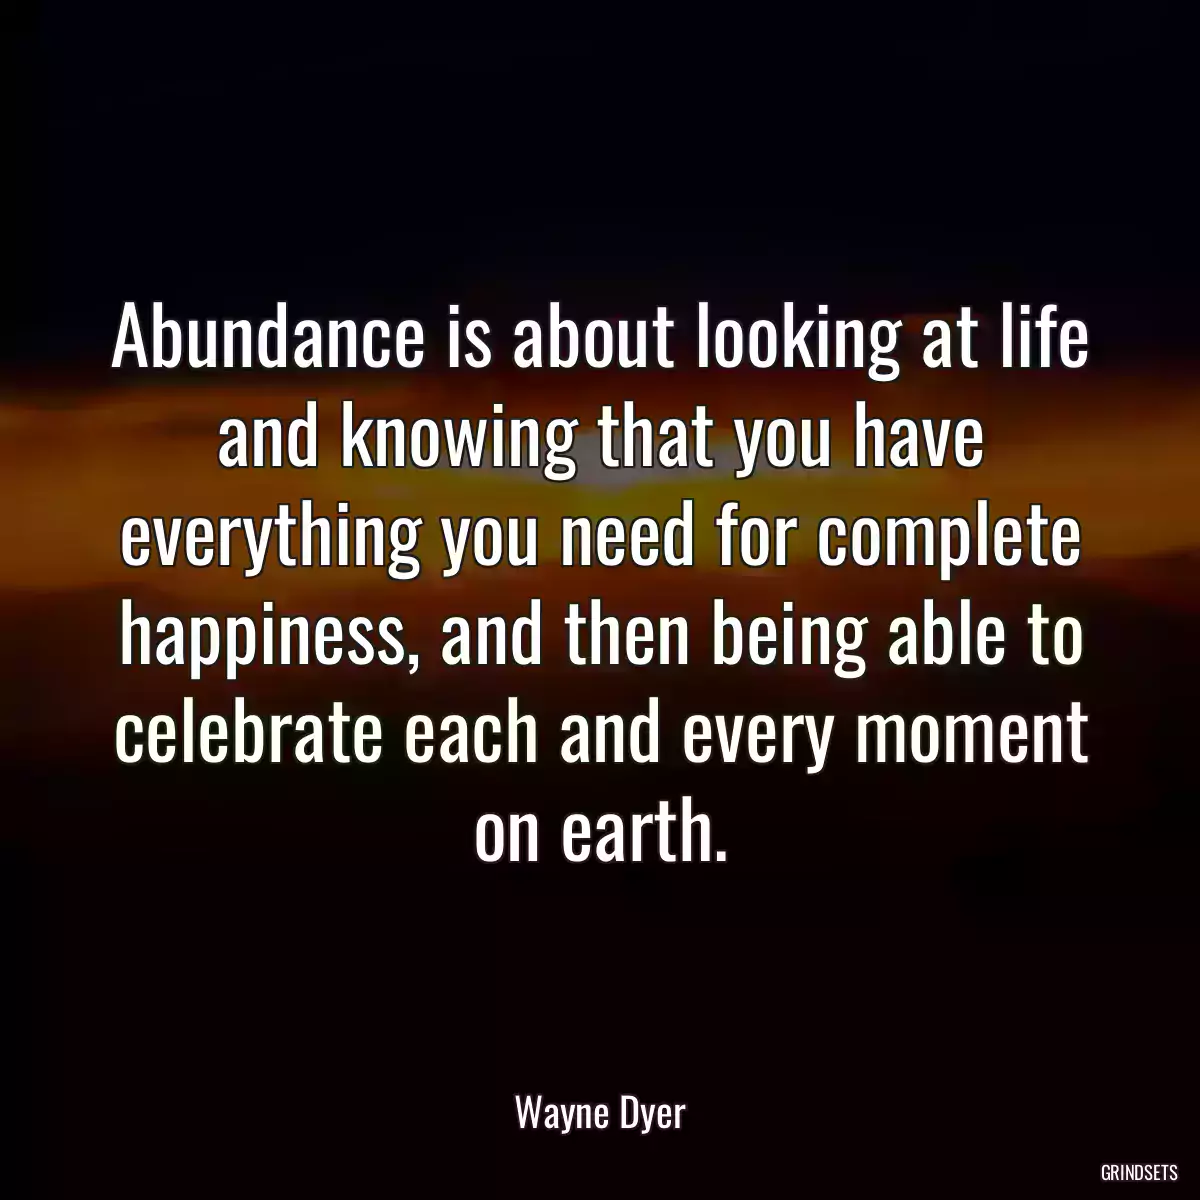 Abundance is about looking at life and knowing that you have everything you need for complete happiness, and then being able to celebrate each and every moment on earth.